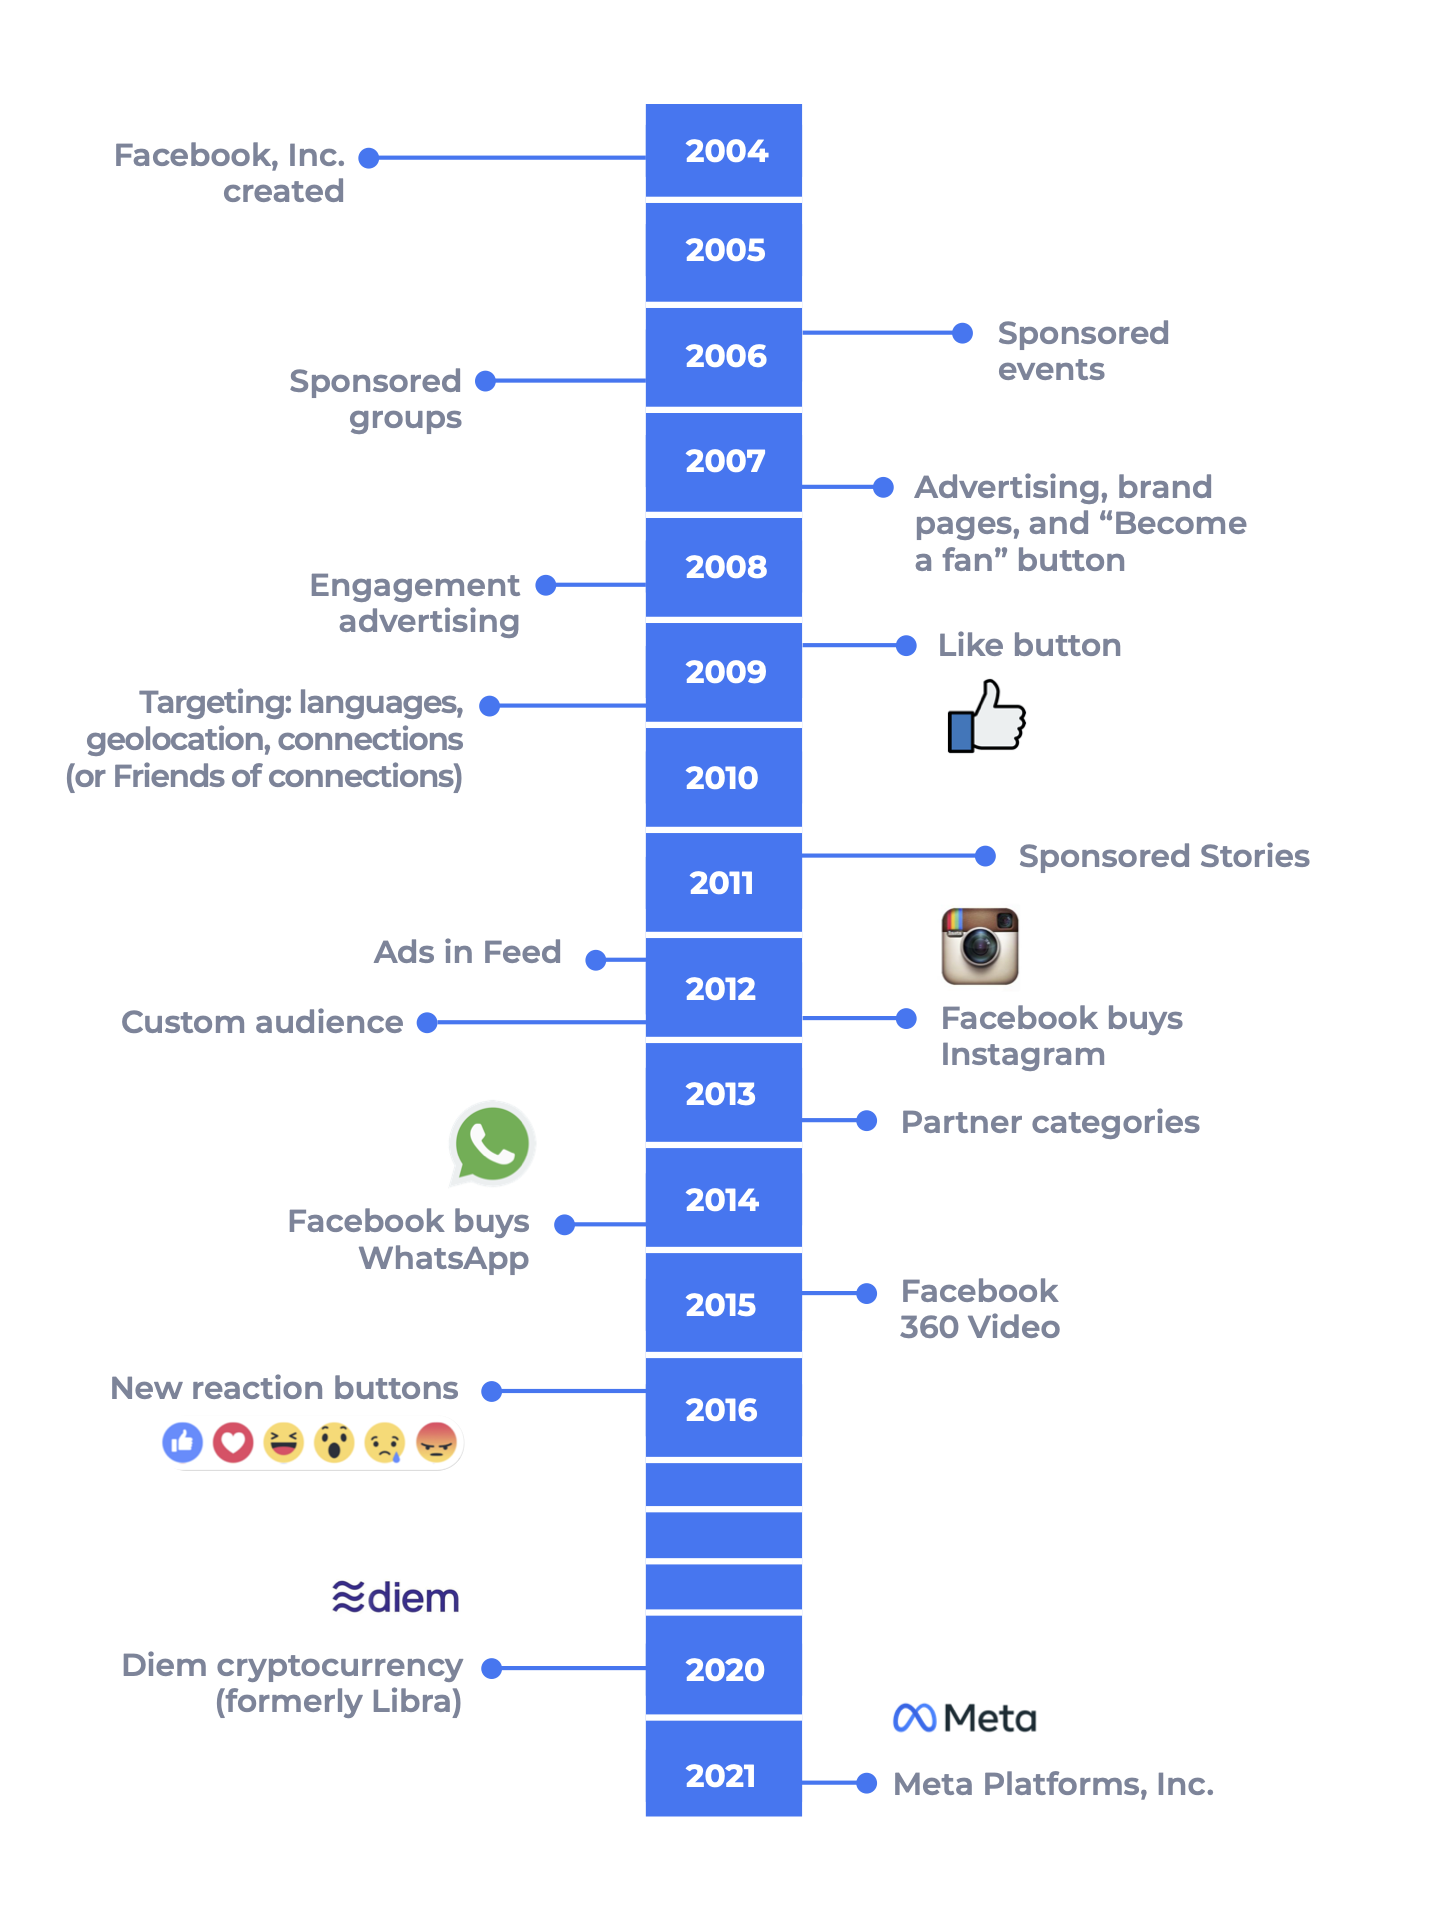 Historical timeline with key dates of the Facebook company.